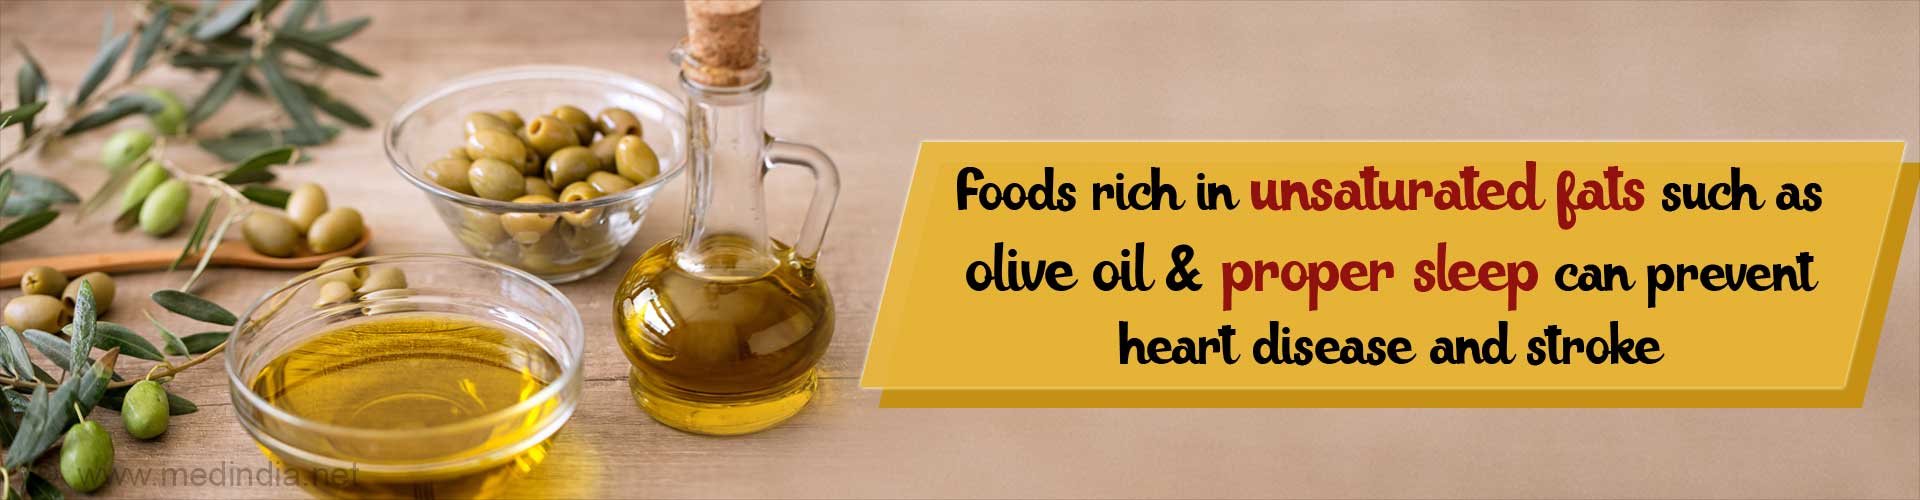 Foods rich in unsaturated fats such as olive oil and proper sleep can prevent heart disease and stroke.